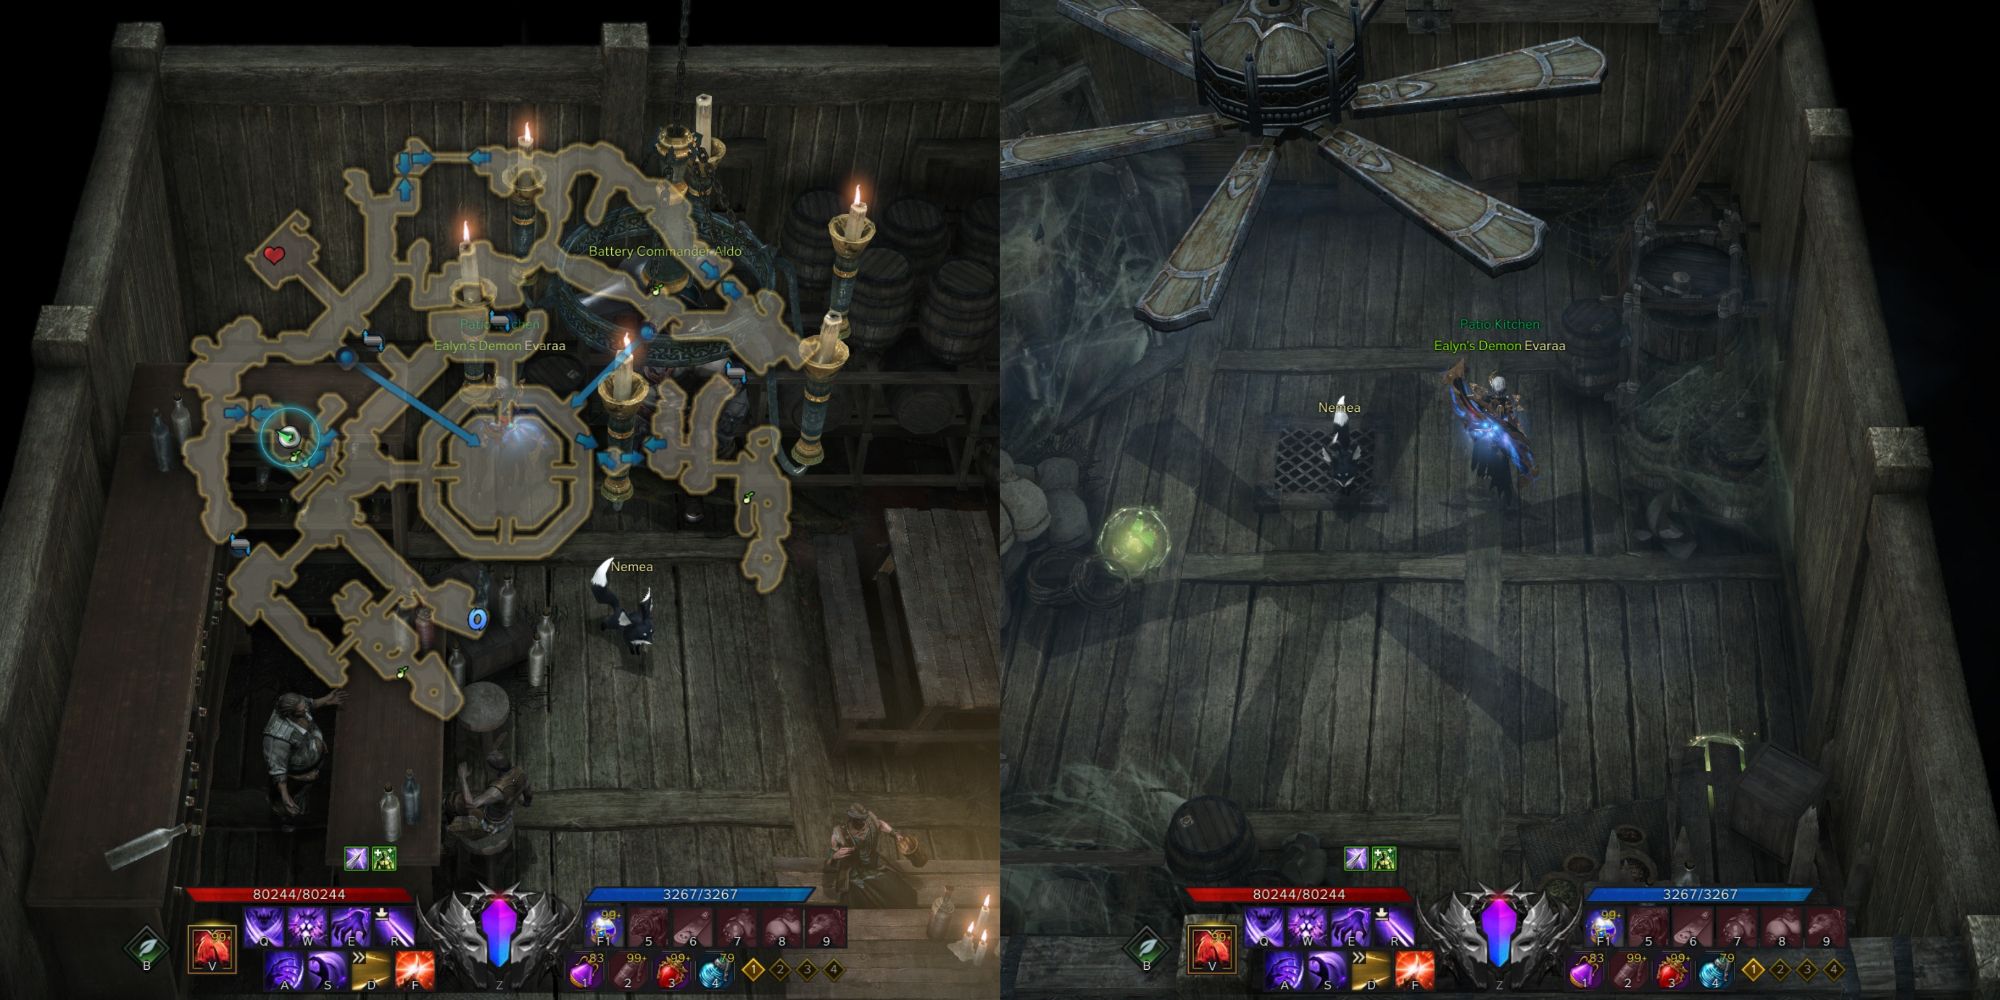 Lost Ark split image of Hypnos's Eyes Mokoko Seeds 2 and 3 location with minimap open and their hidden entrance